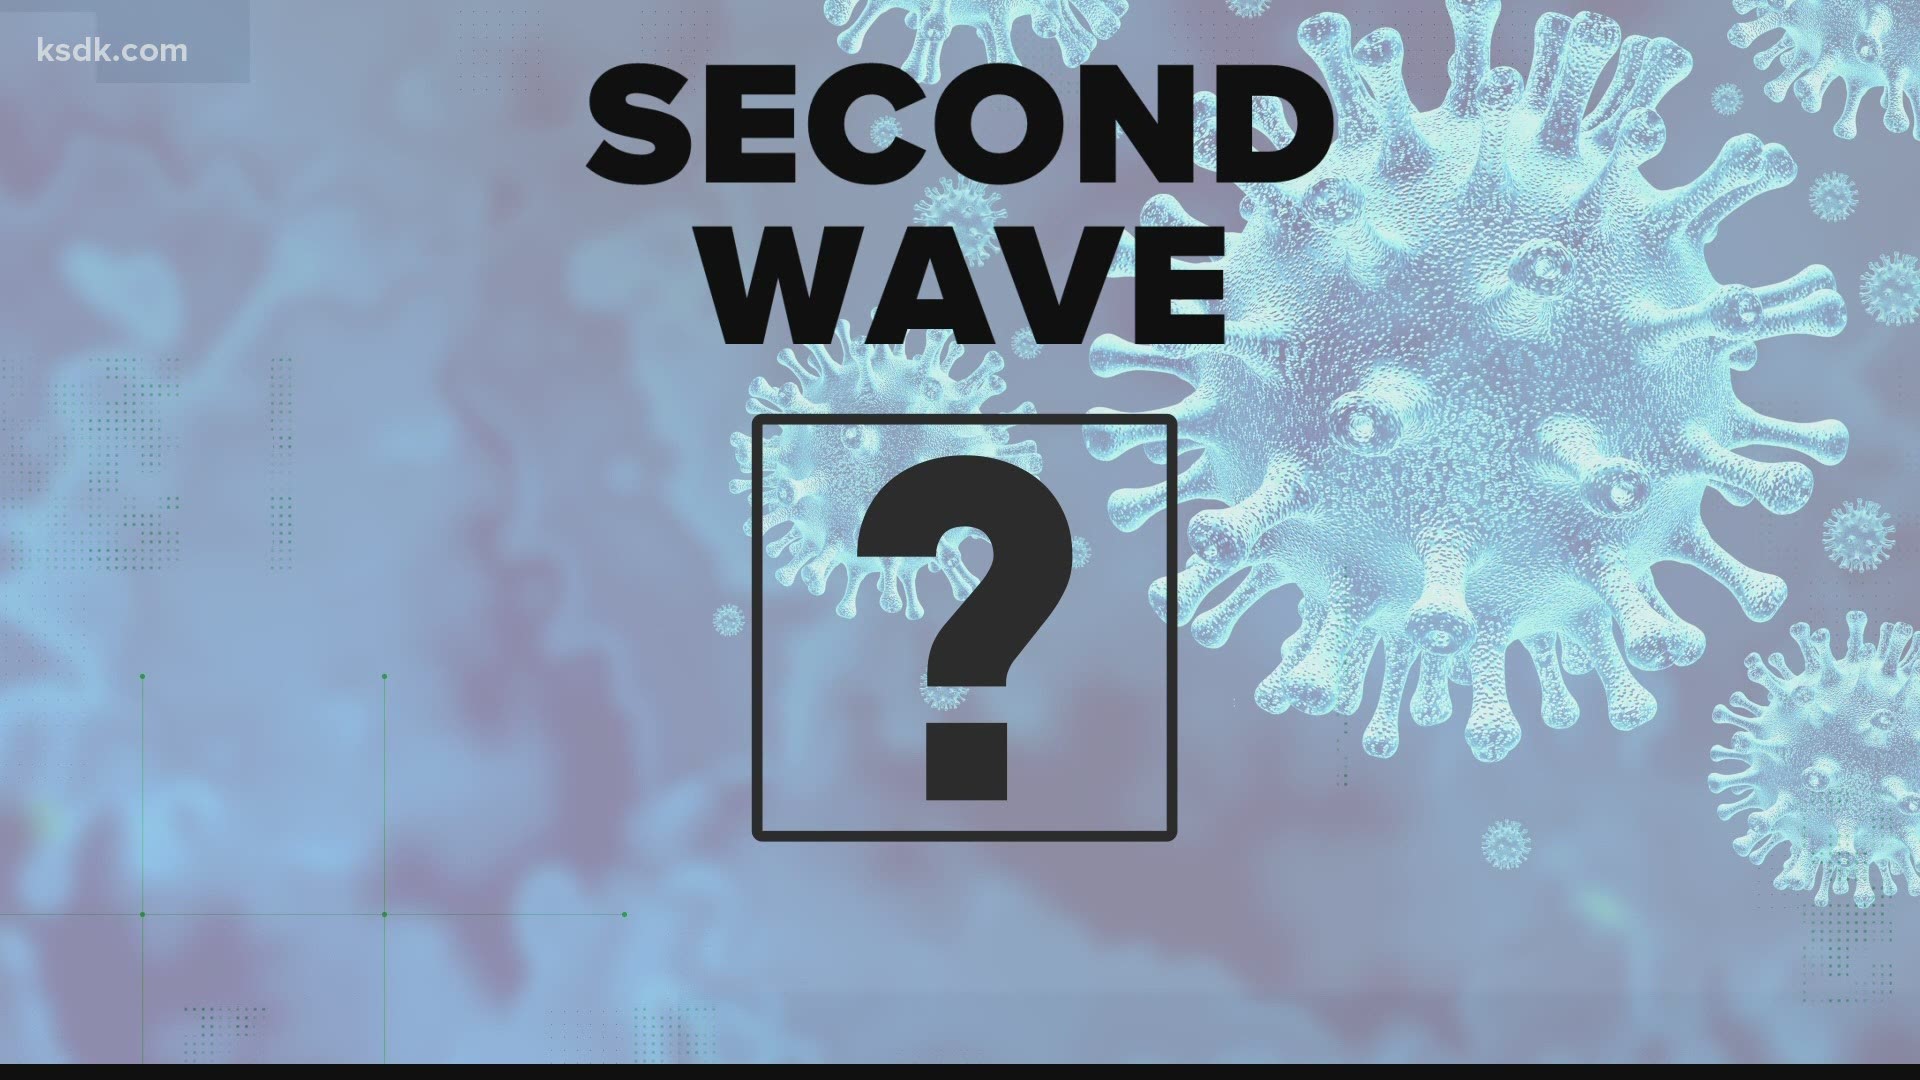 Experts say we will likely see another peak of cases in the fall and winter months. So we're verifying, what is the threshold to qualify as a "second wave?"